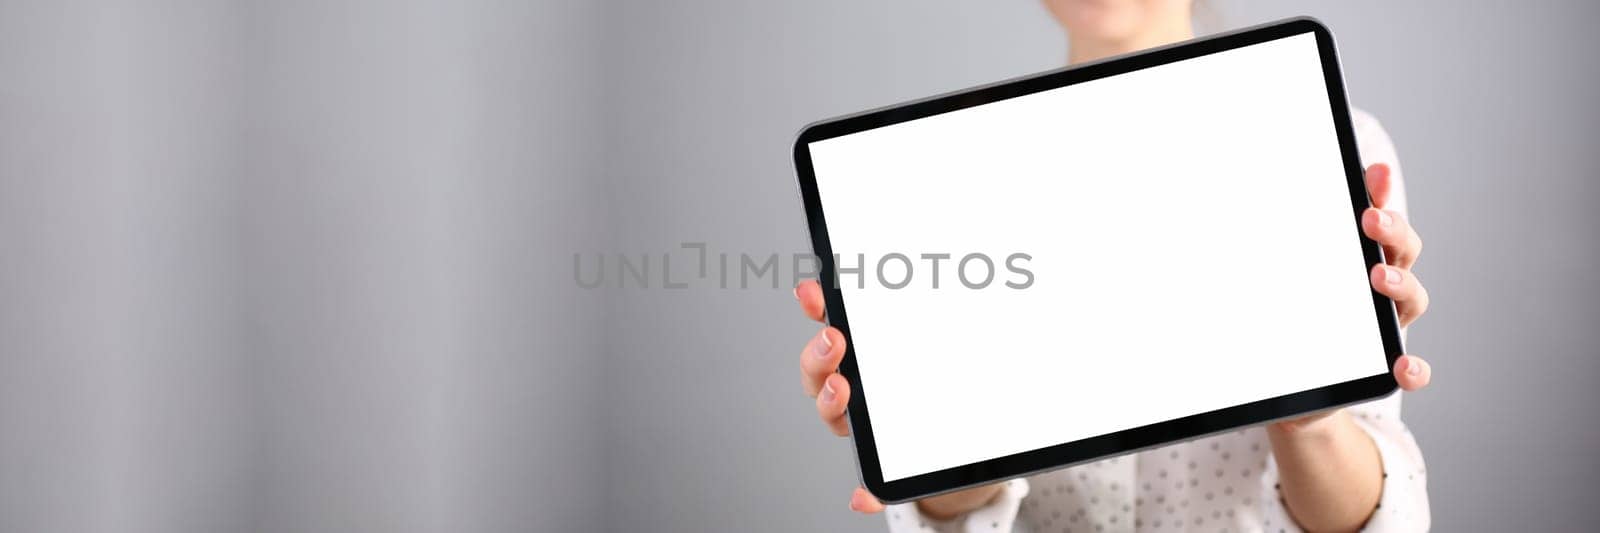 Smiling beautiful woman is holding advertising tablet. Apps and banner for text concept